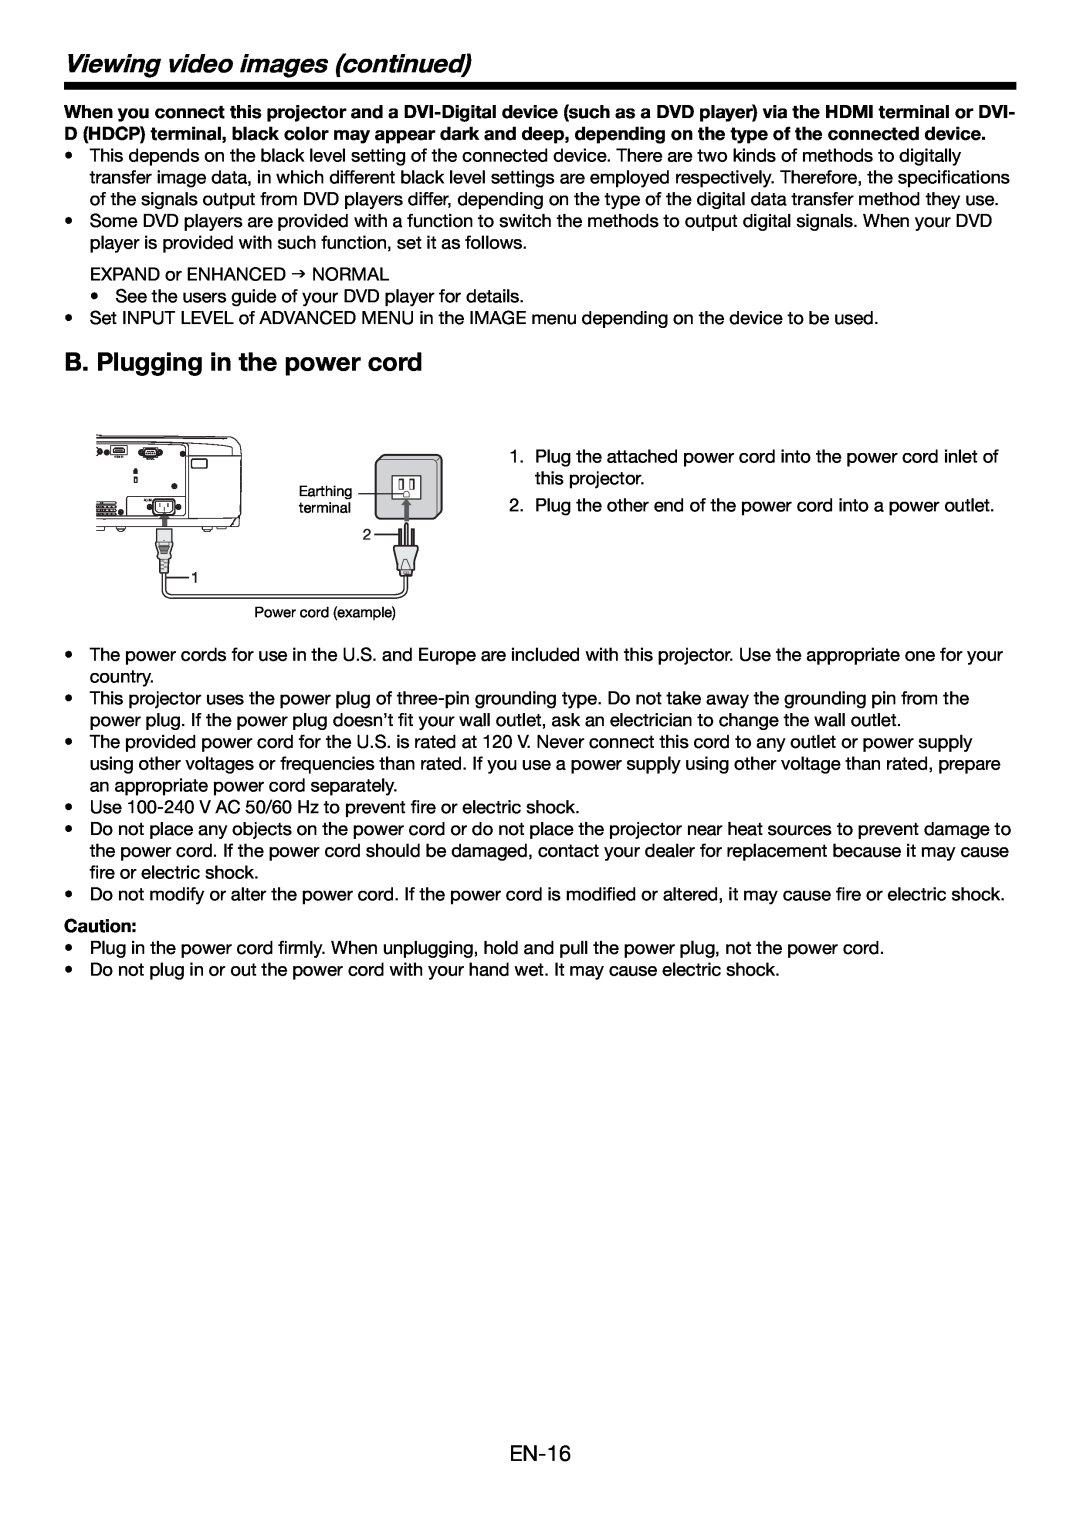 Mitsubishi Electronics HC4900 user manual B. Plugging in the power cord, Viewing video images continued, EN-16 